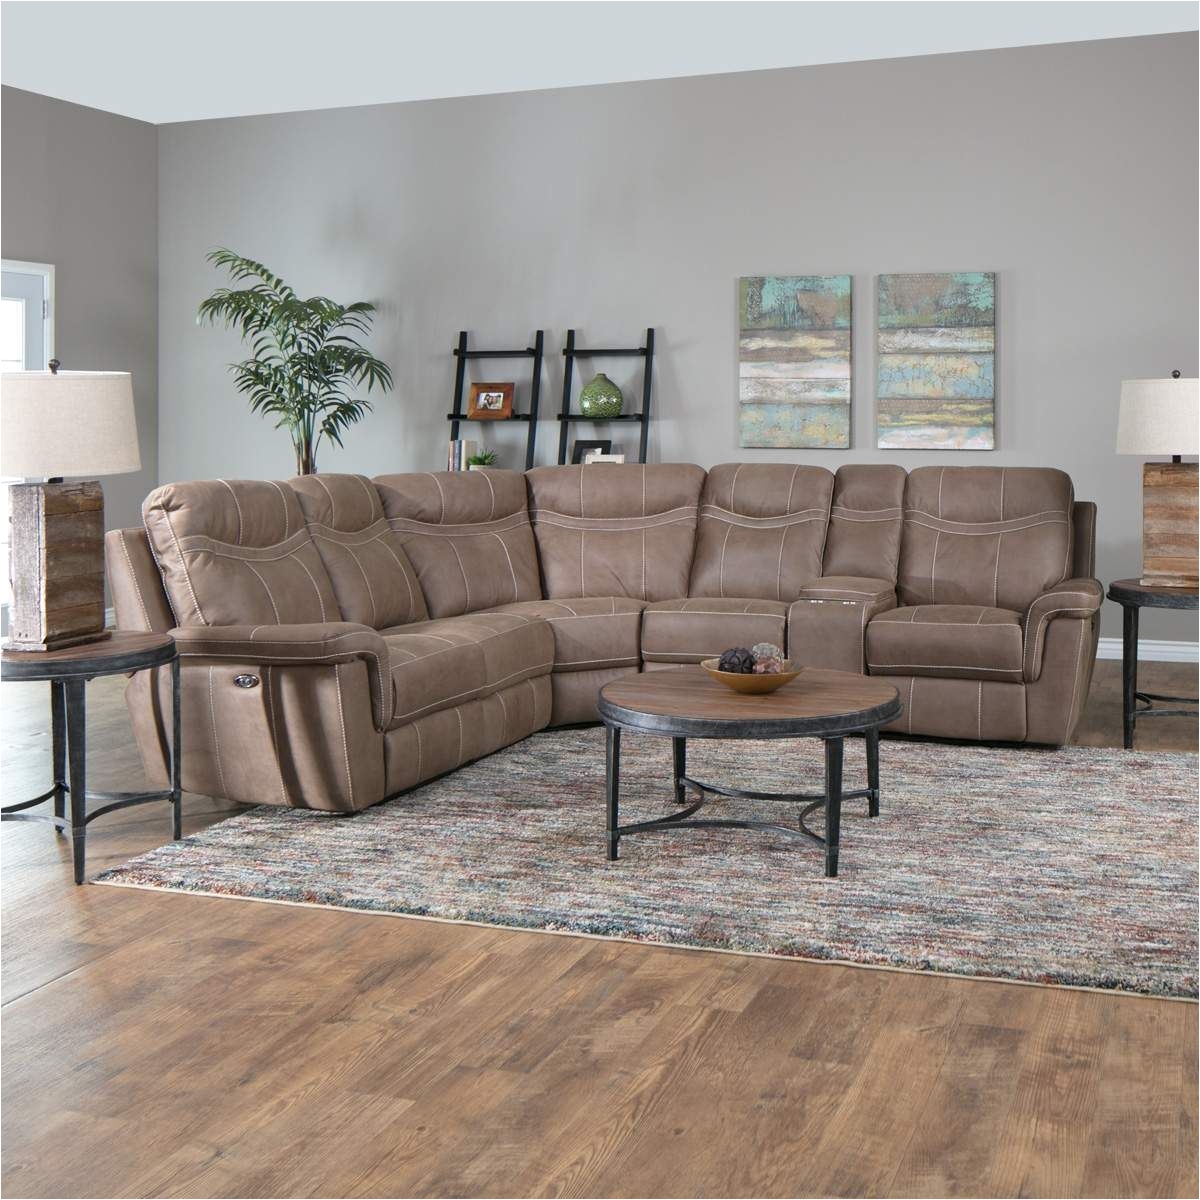 Jerome S Furniture San Diego Ca Chadwick Reclining Sectional Living Room Sets Room Set and Consoles